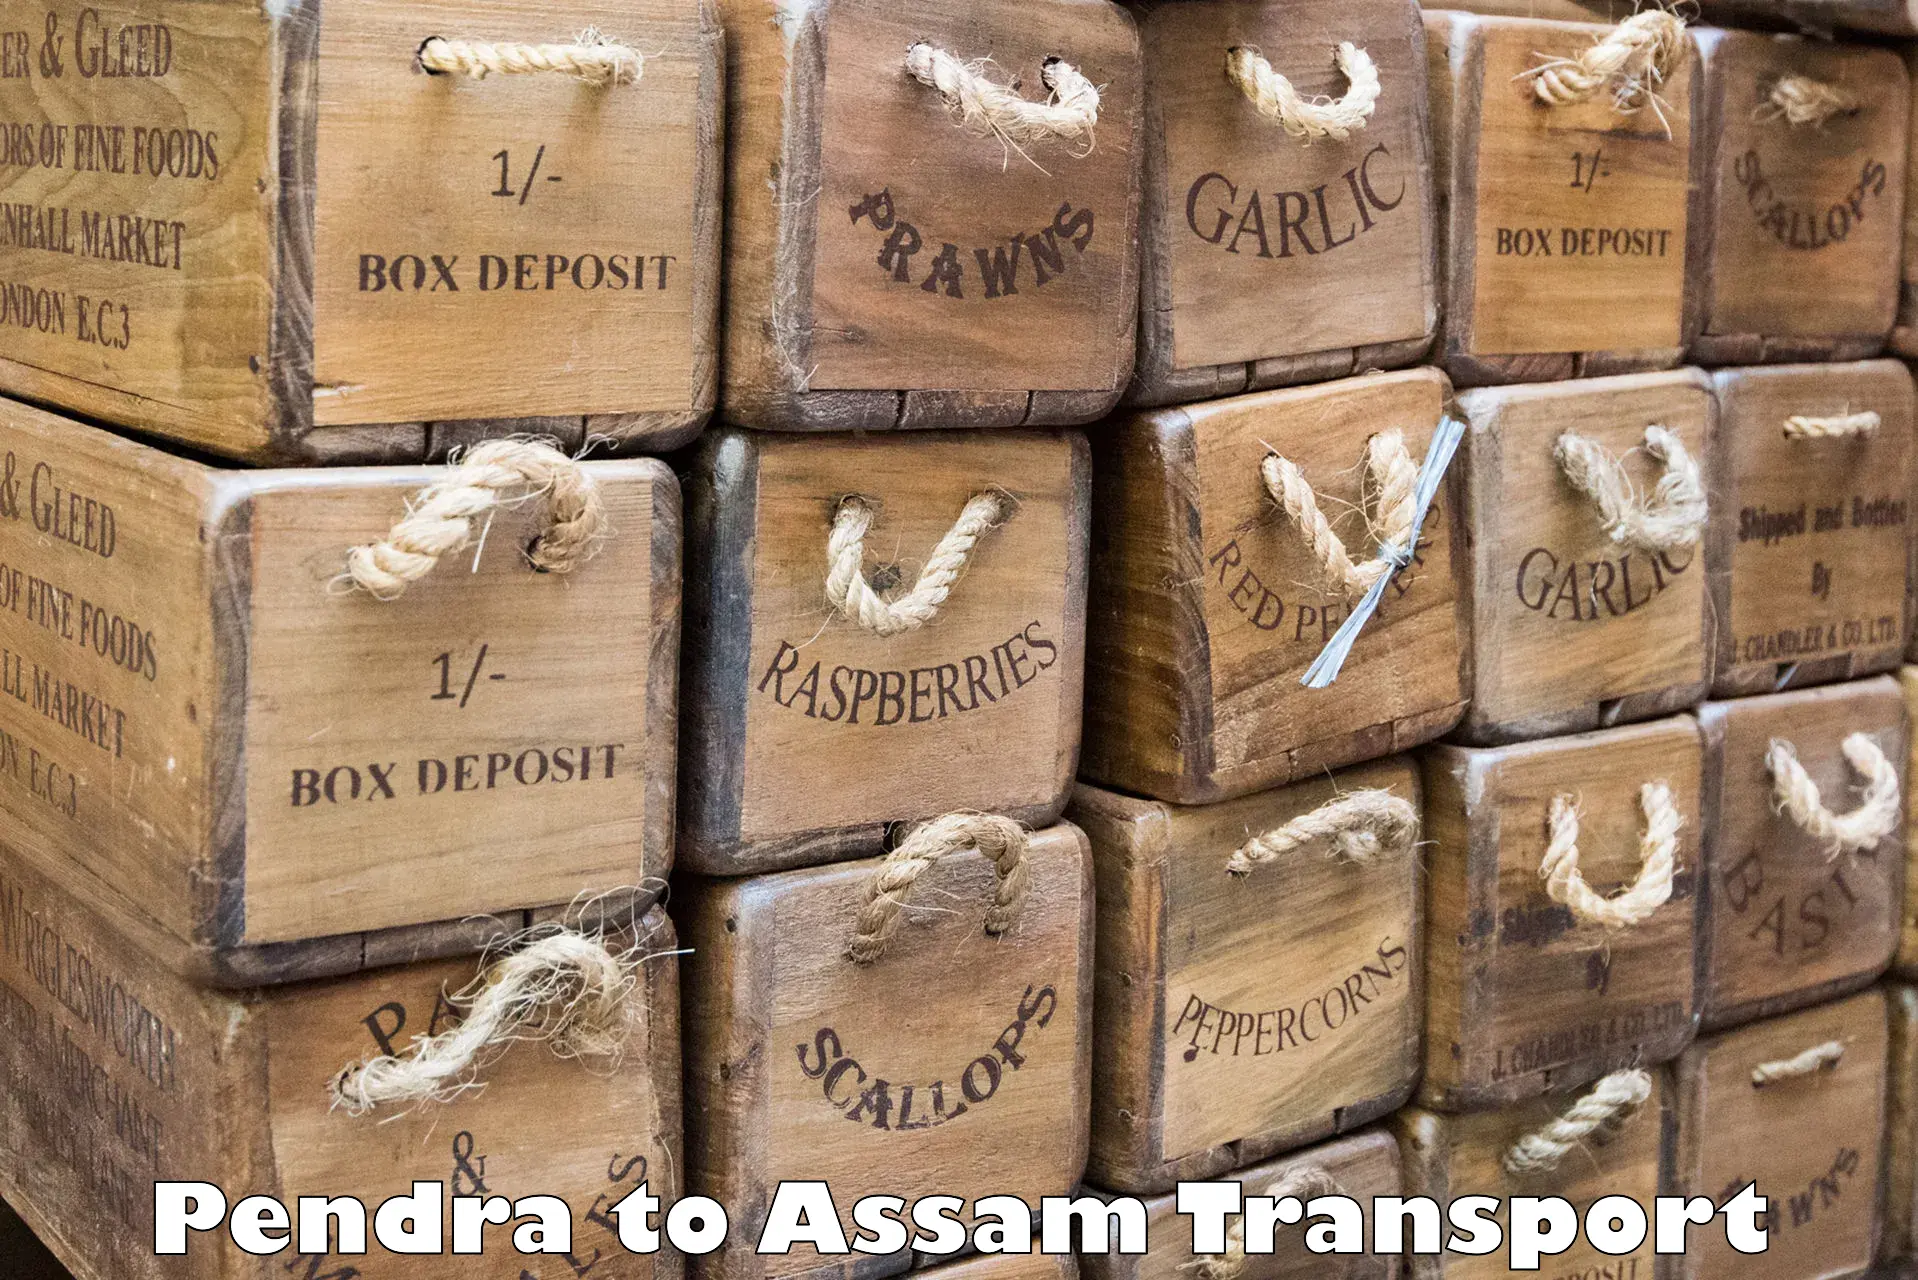 Goods delivery service Pendra to Lala Assam